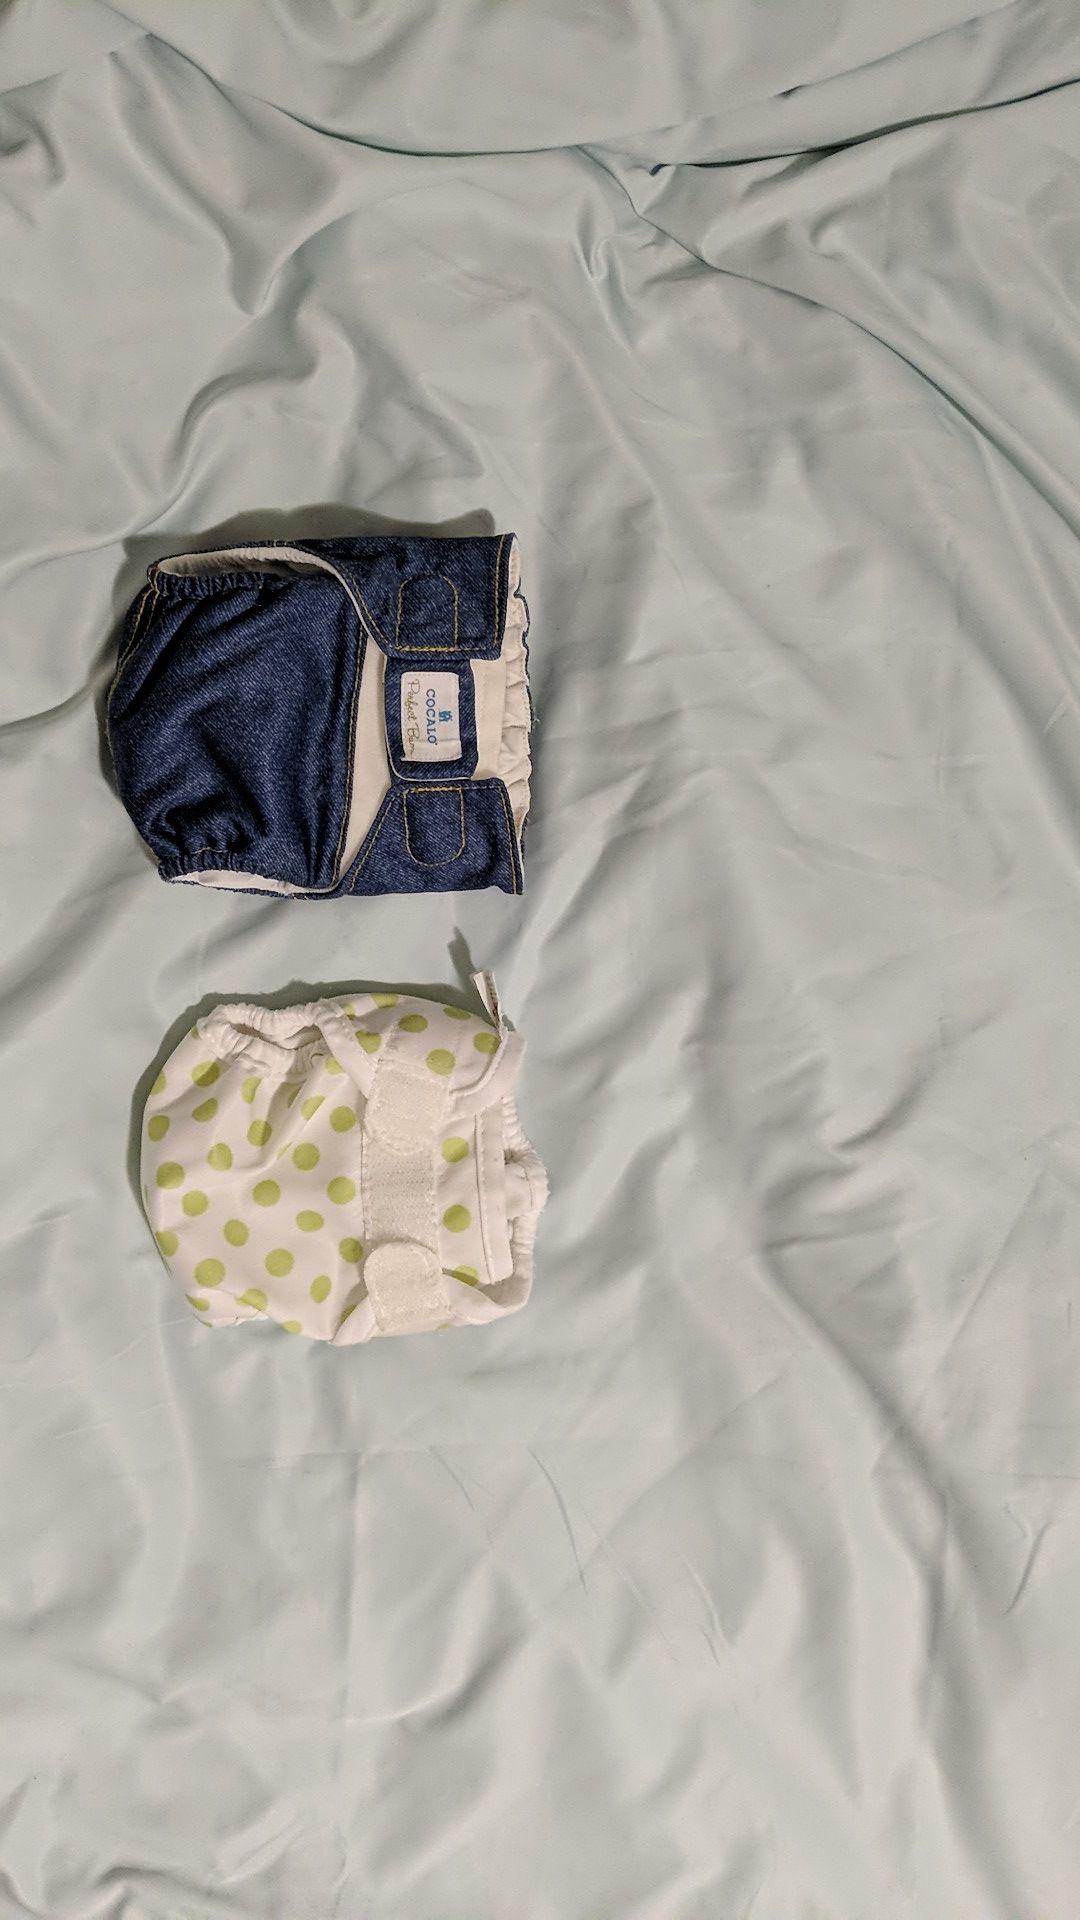 Cocalo and bummis newborn diapers